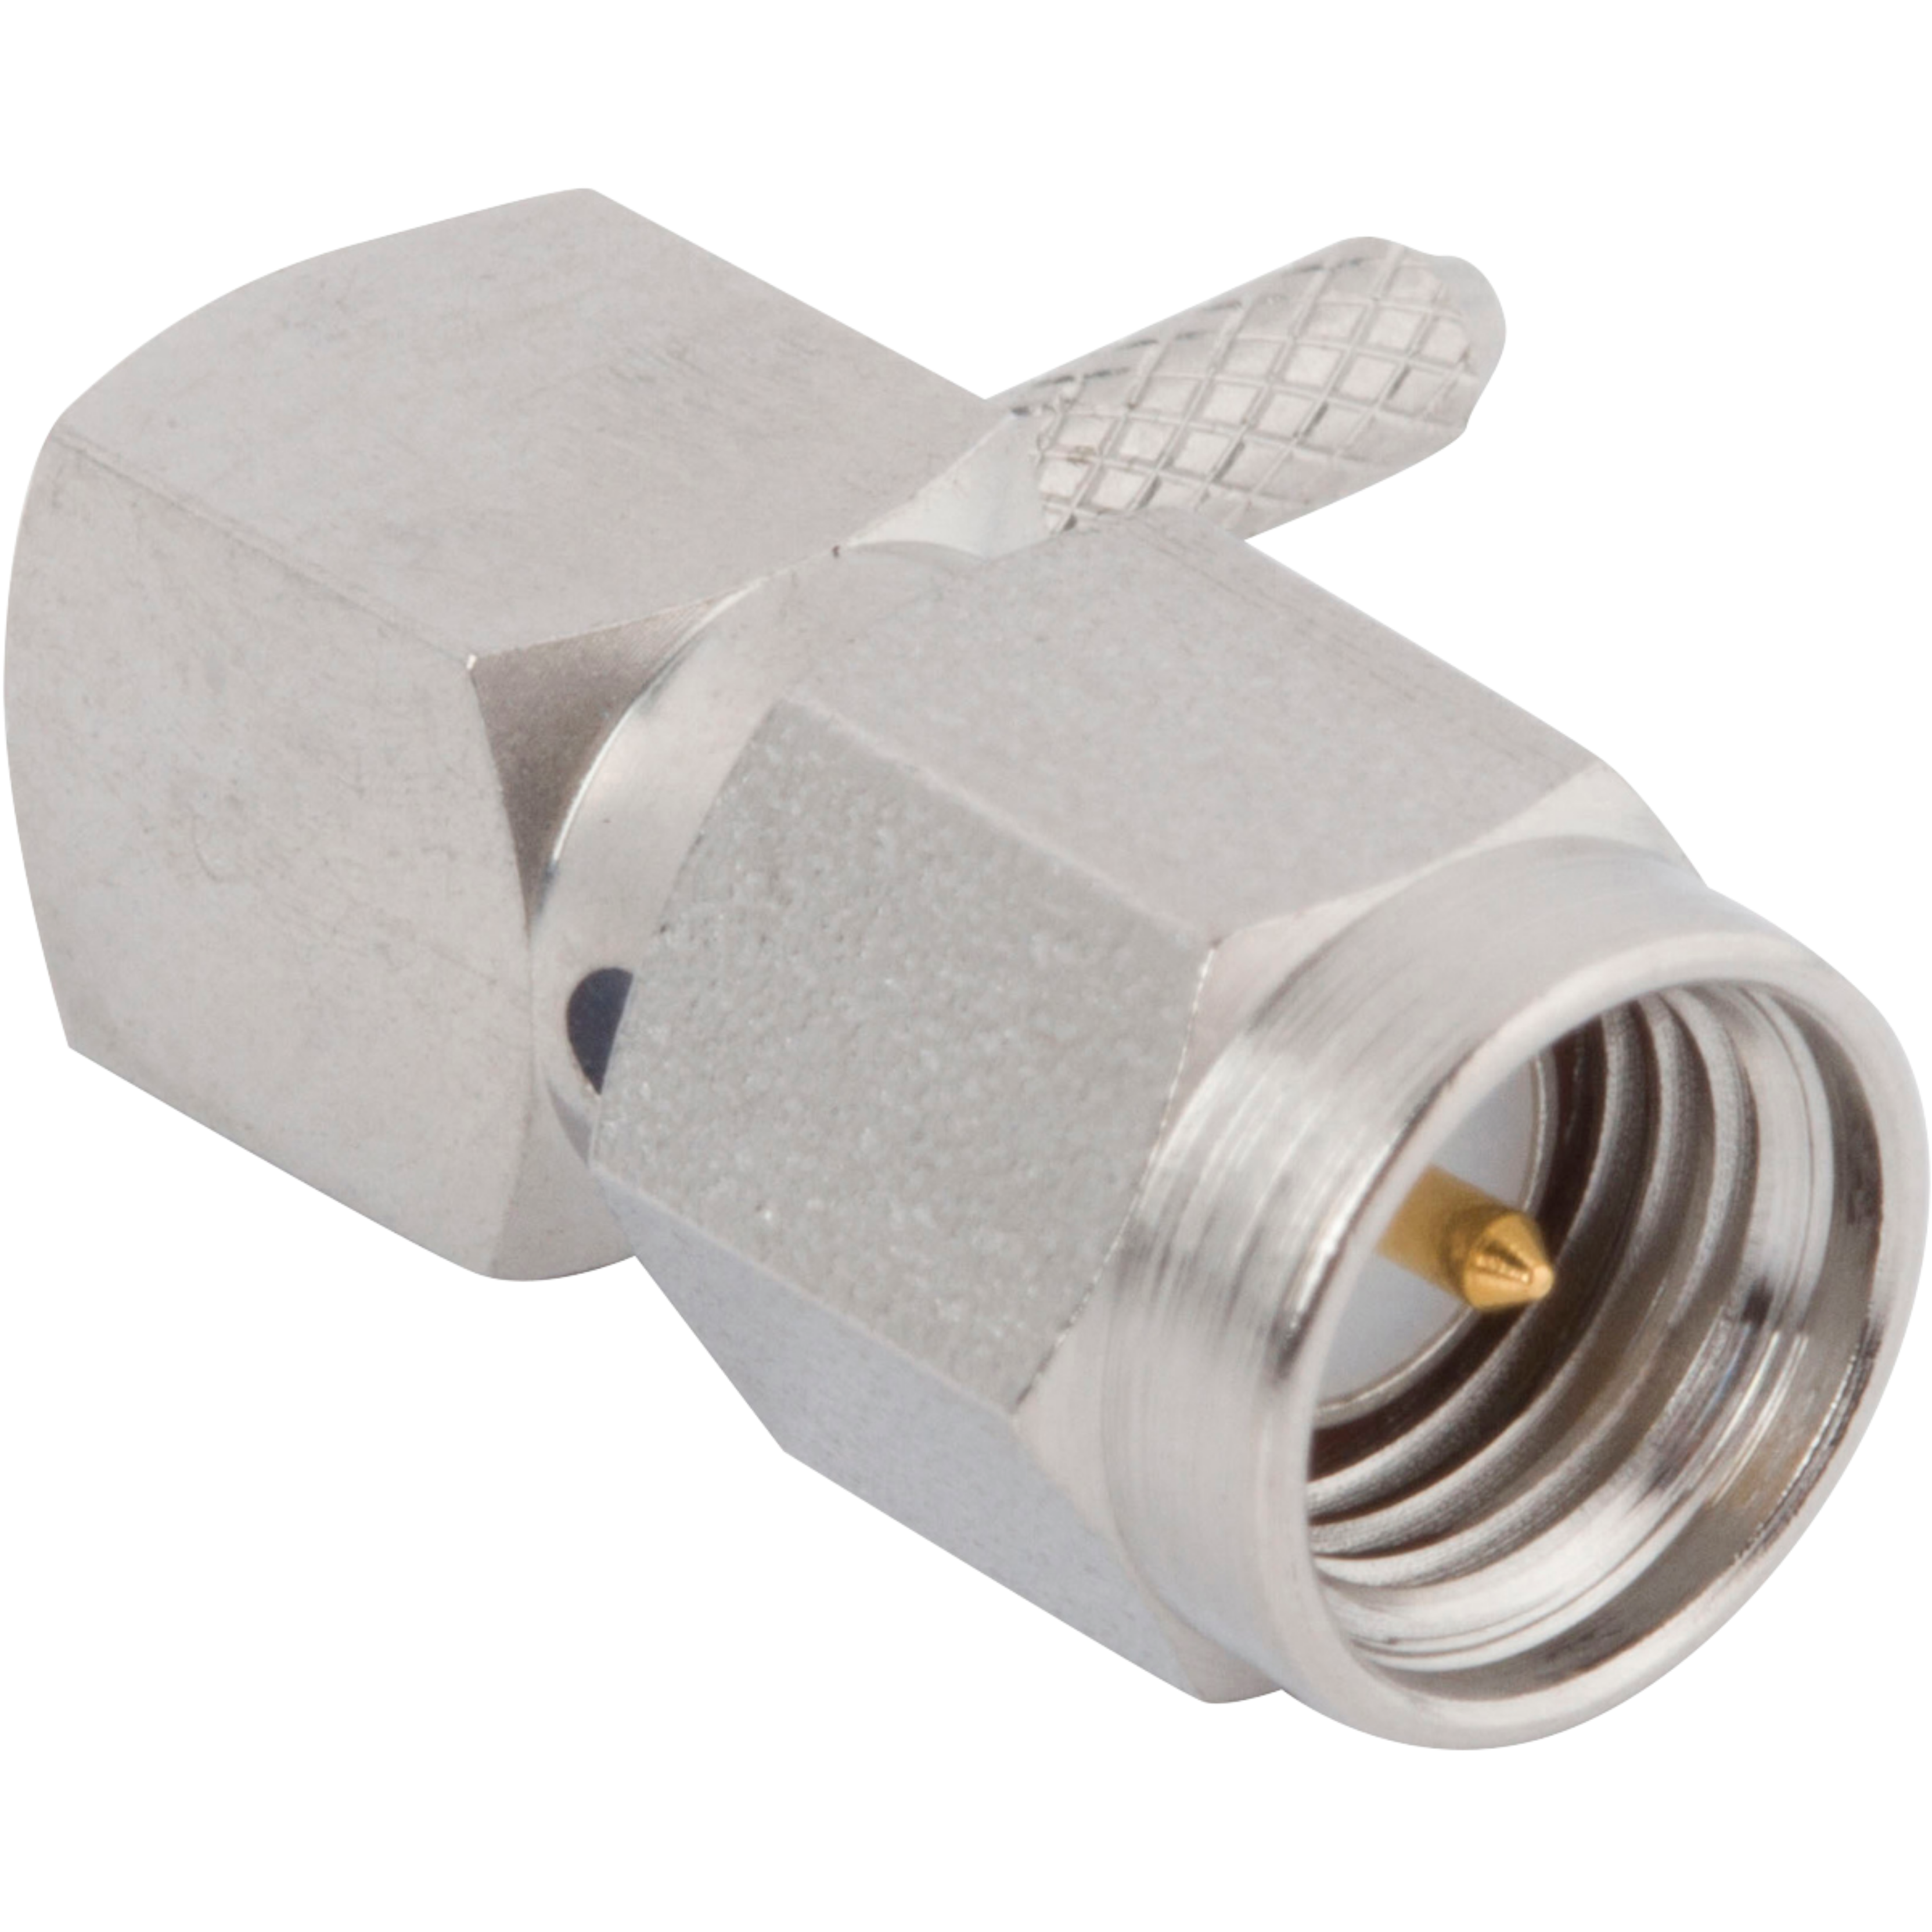 SMA Male Connector, R/A for RG-58 Cable, M39012/56B3117